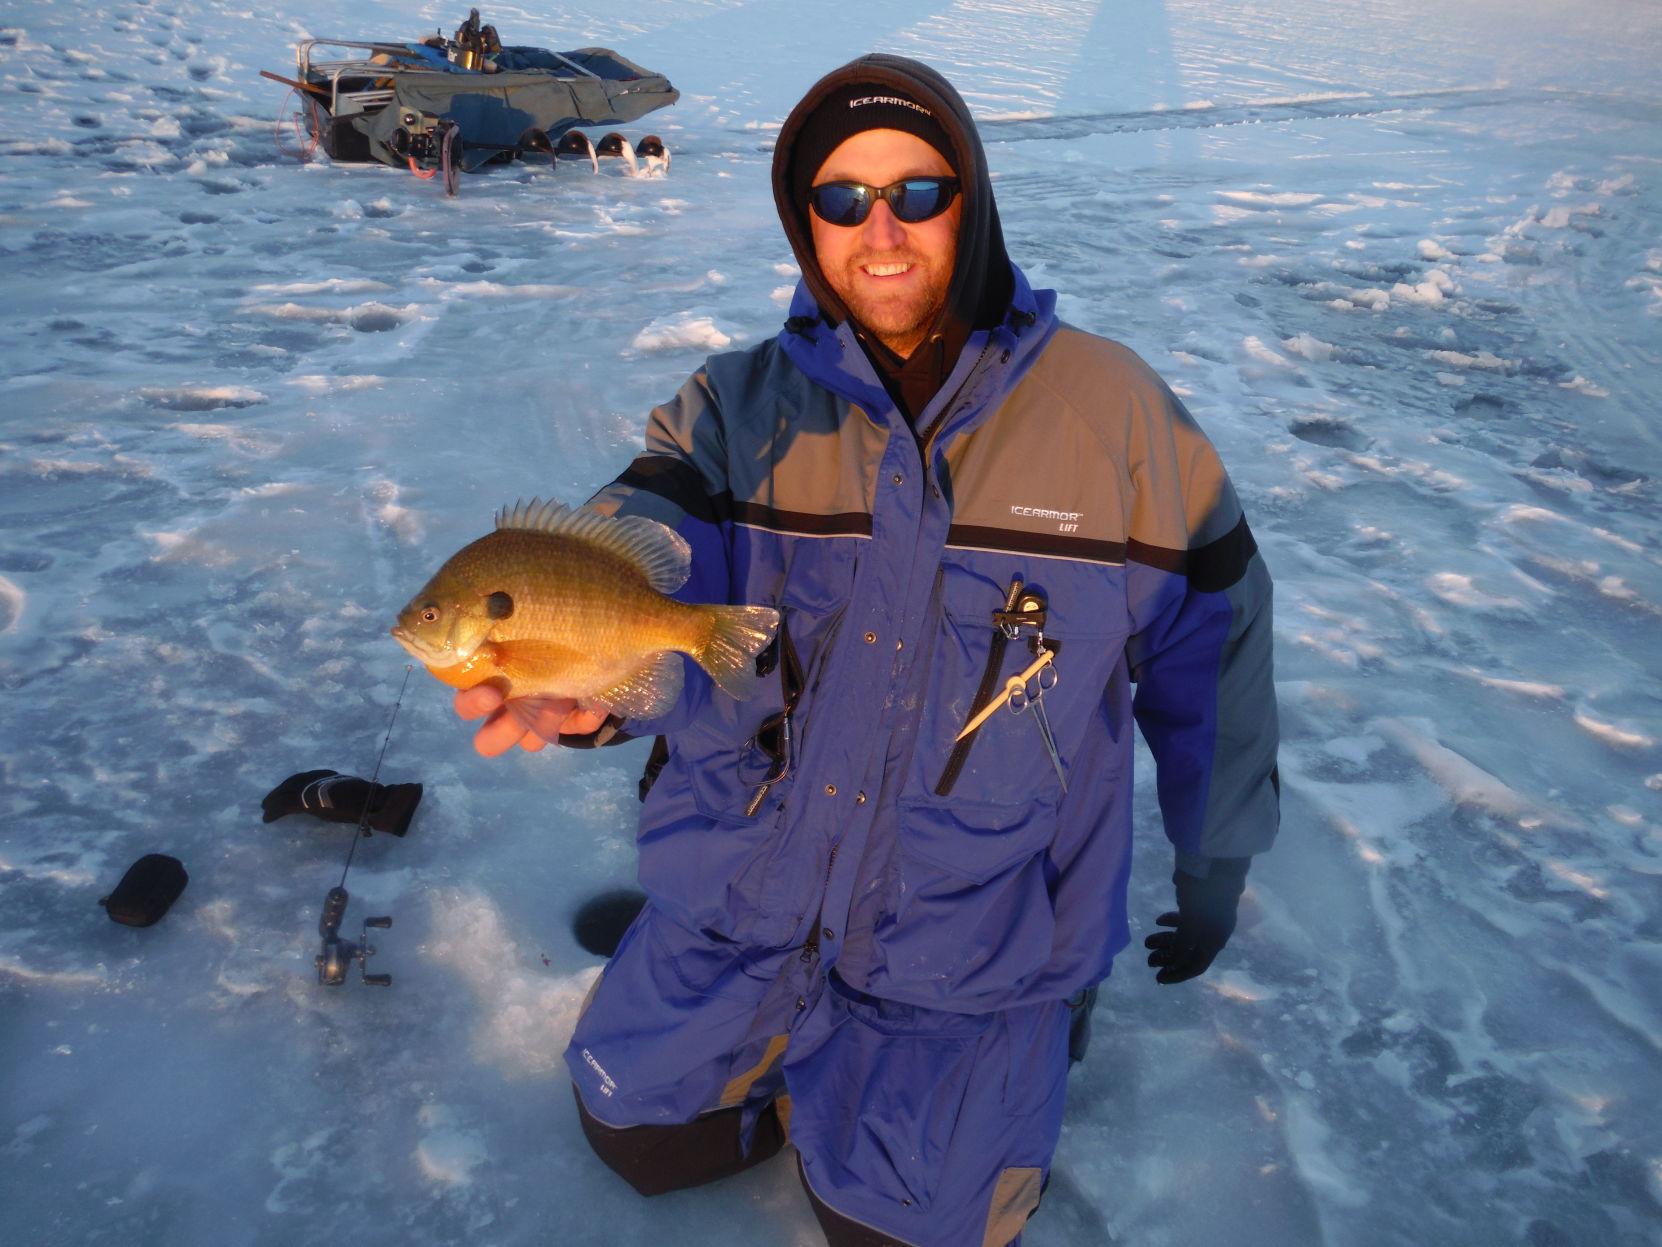 Ice-fishing fun can be had without breaking budget, Outdoors